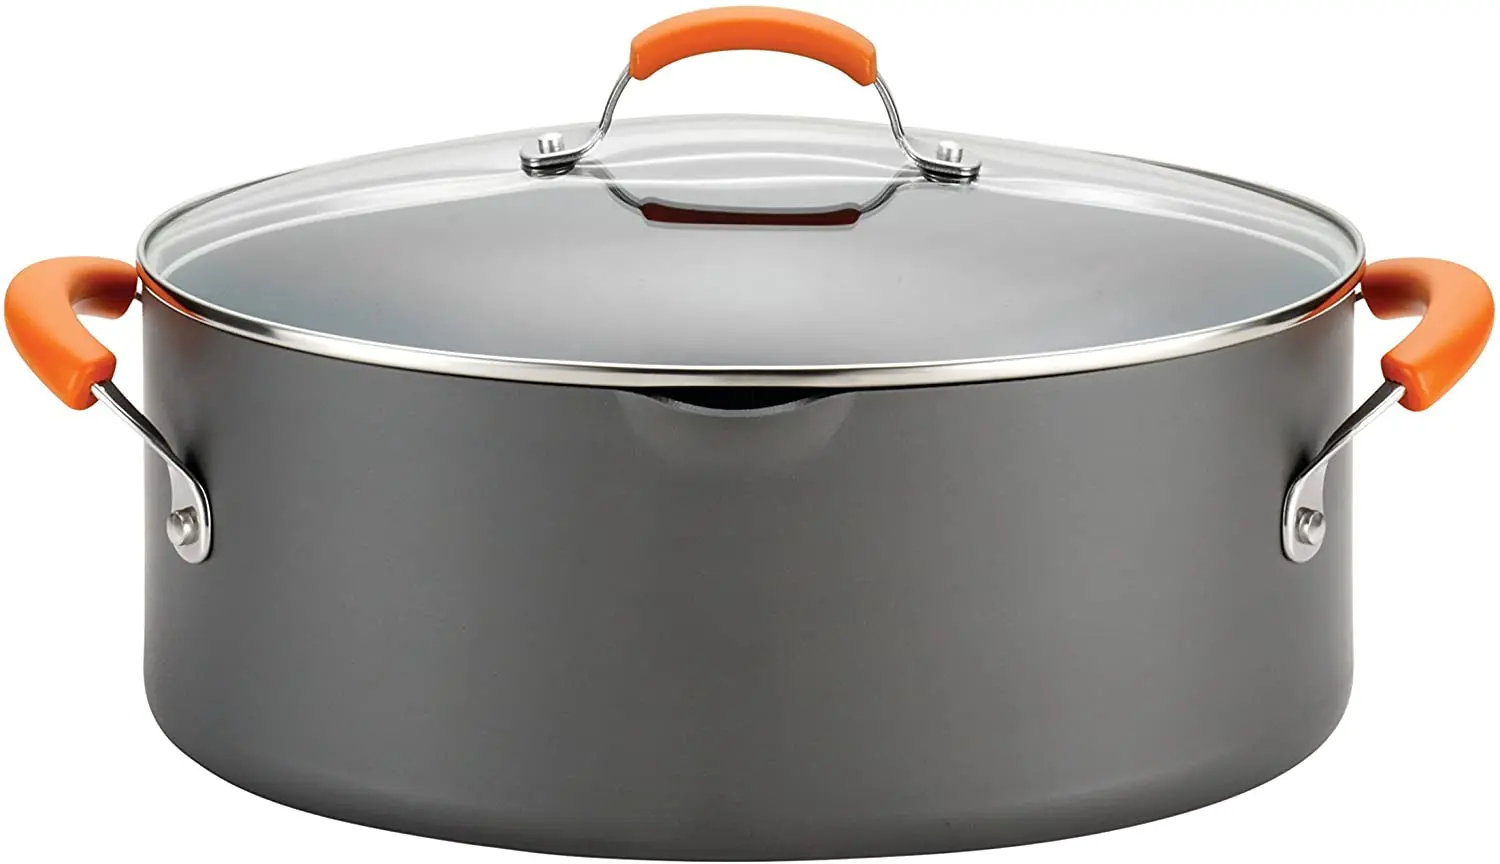 Brights Hard Anodized Nonstick Pasta Pot / Stockpot / Stock Pot Dual-riveted Rubberized Stainless Steel Handles Provide Comfort